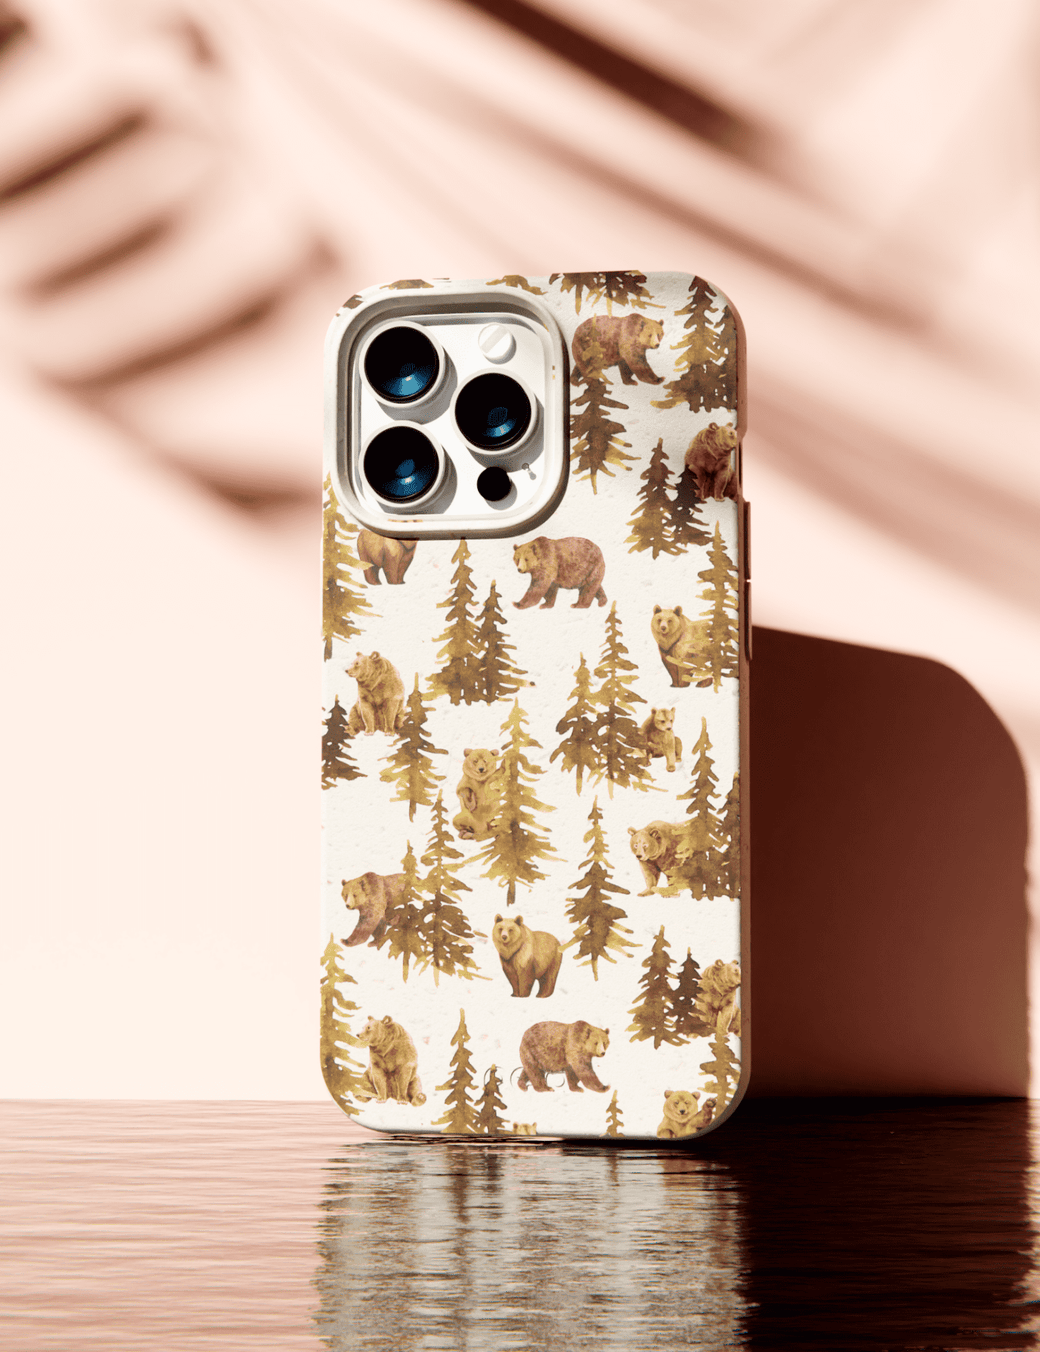 London Fog Into the woods iPhone 6/6s/7/8/SE Case